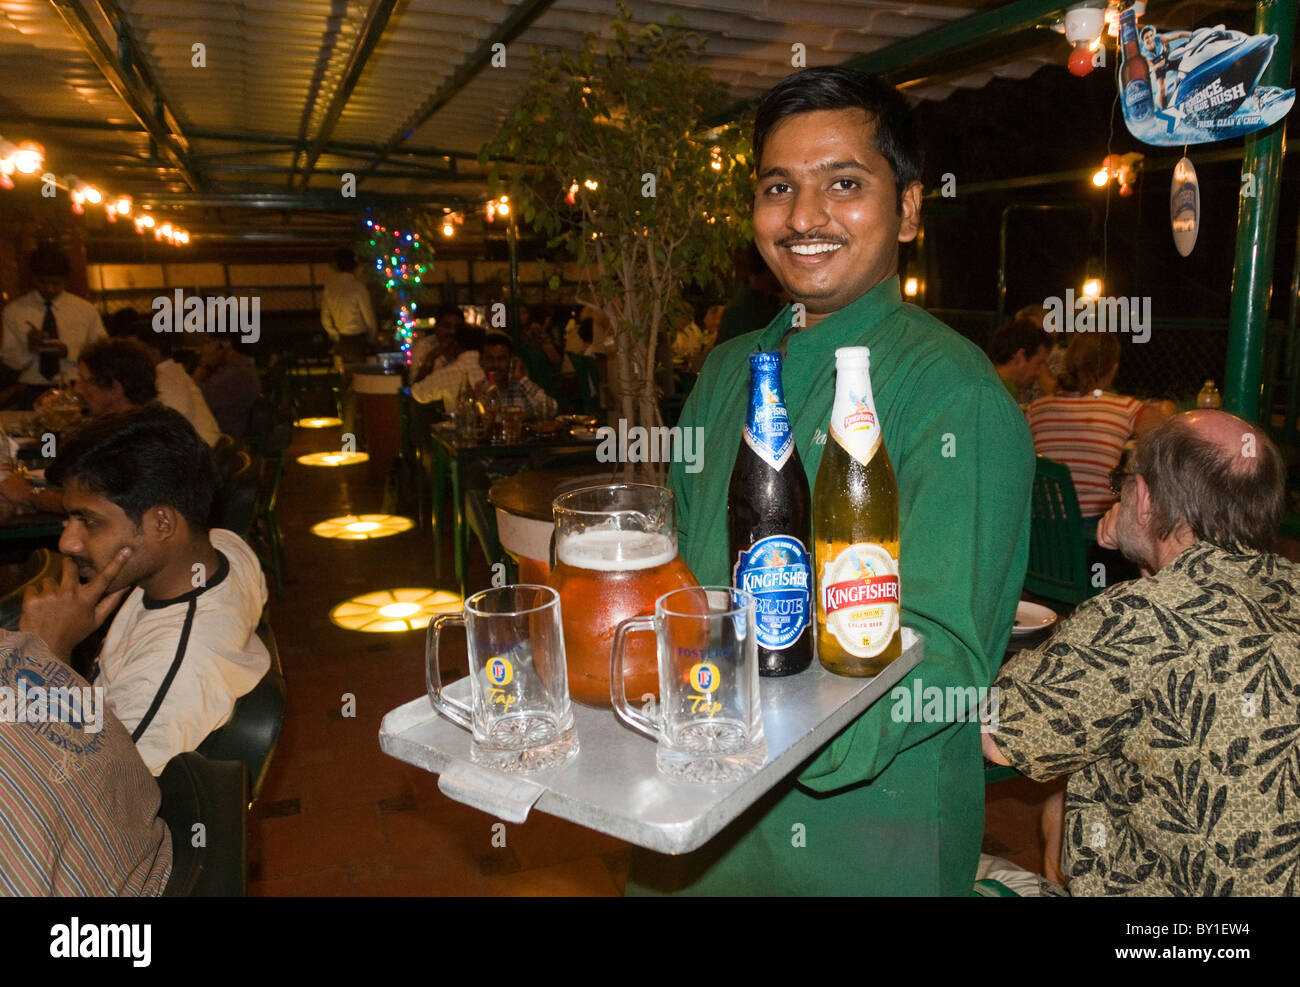 A waiter serving Kingfisher lager beer In a bar restaurant in India Stock Photo